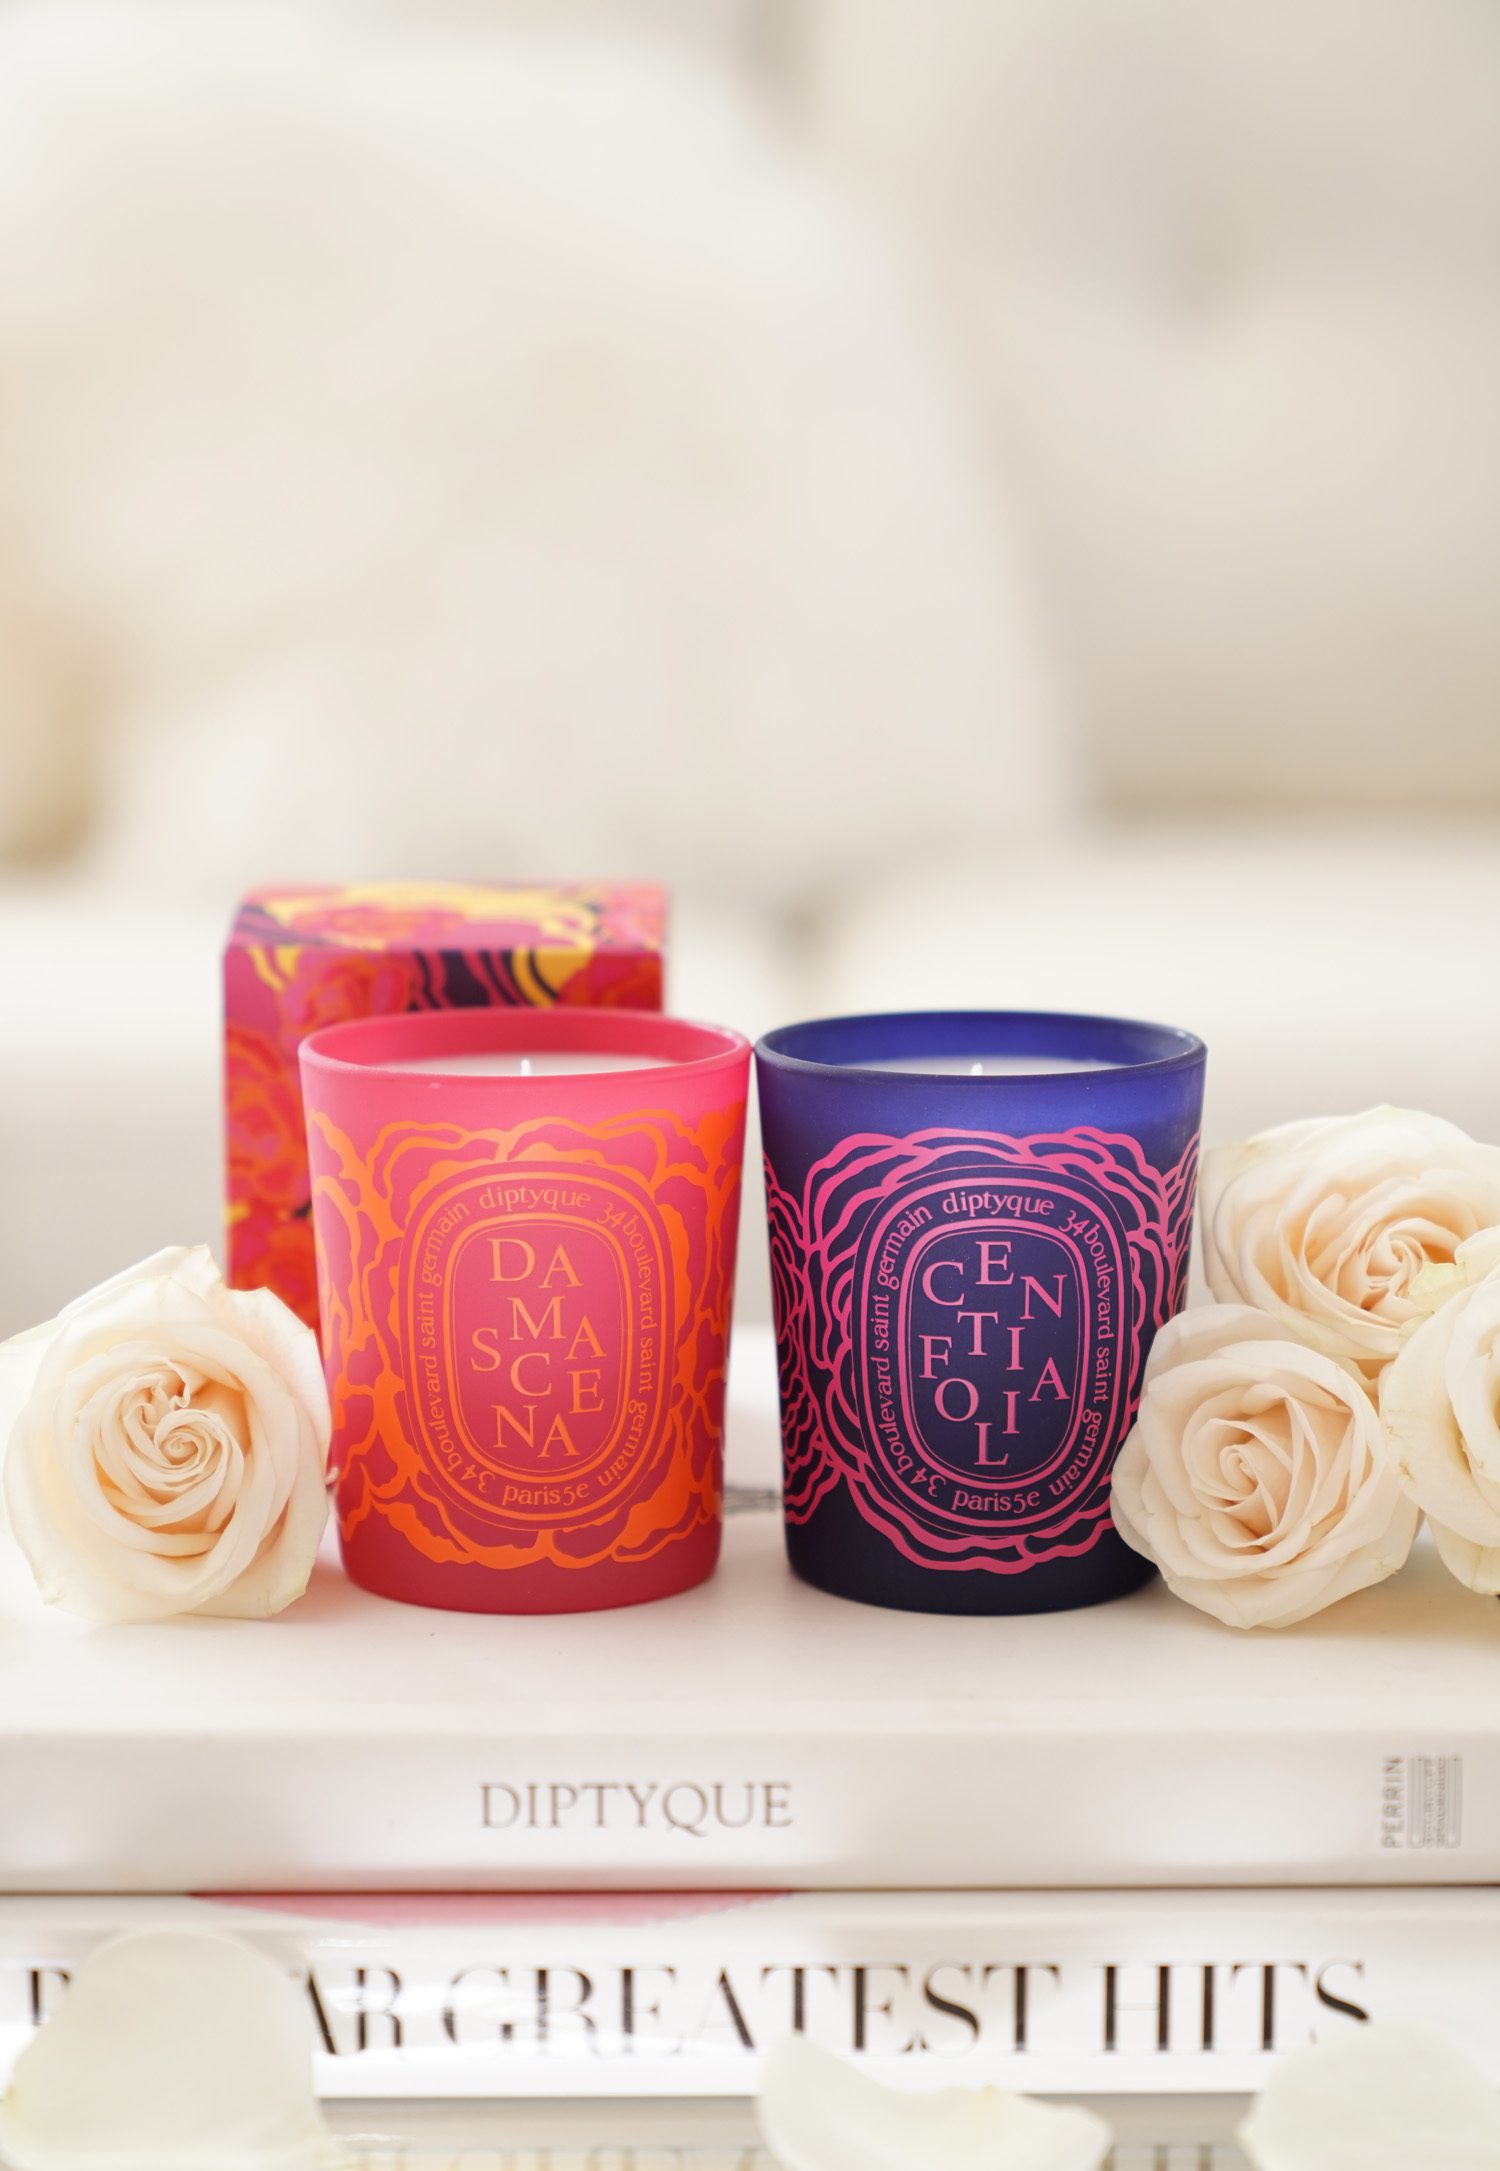 Diptyque Damascena Candle Limited Edition 2.4 oz 70 g 